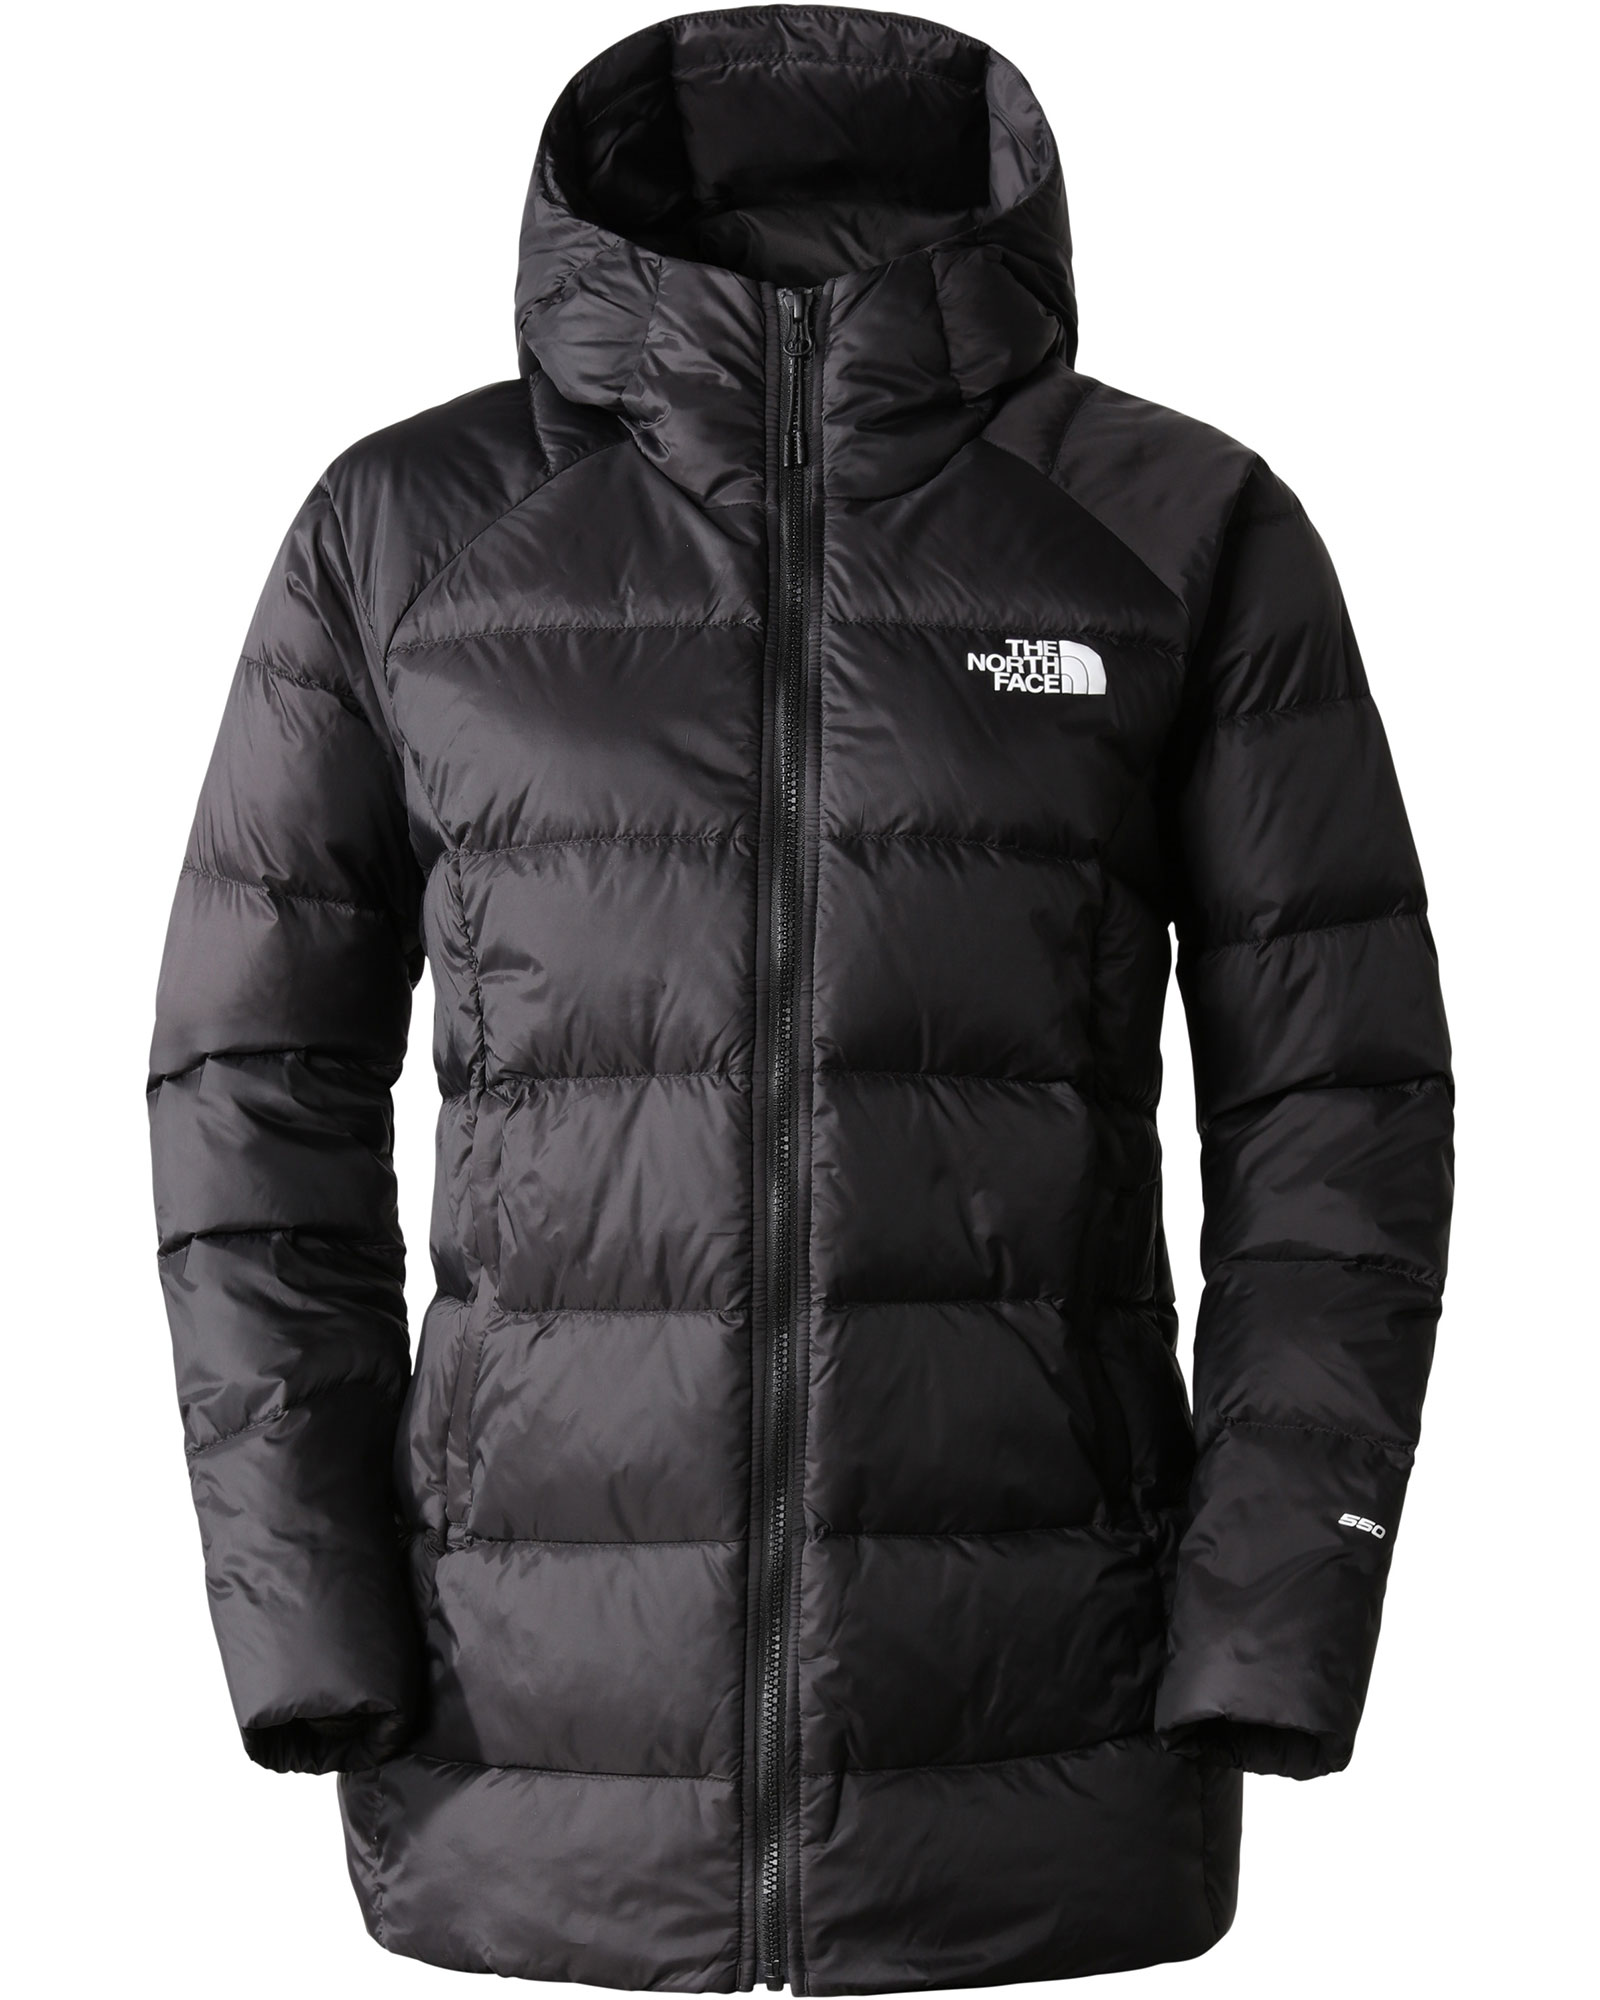 The North Face Hyalite Women’s Down Parka Jacket - TNF Black S